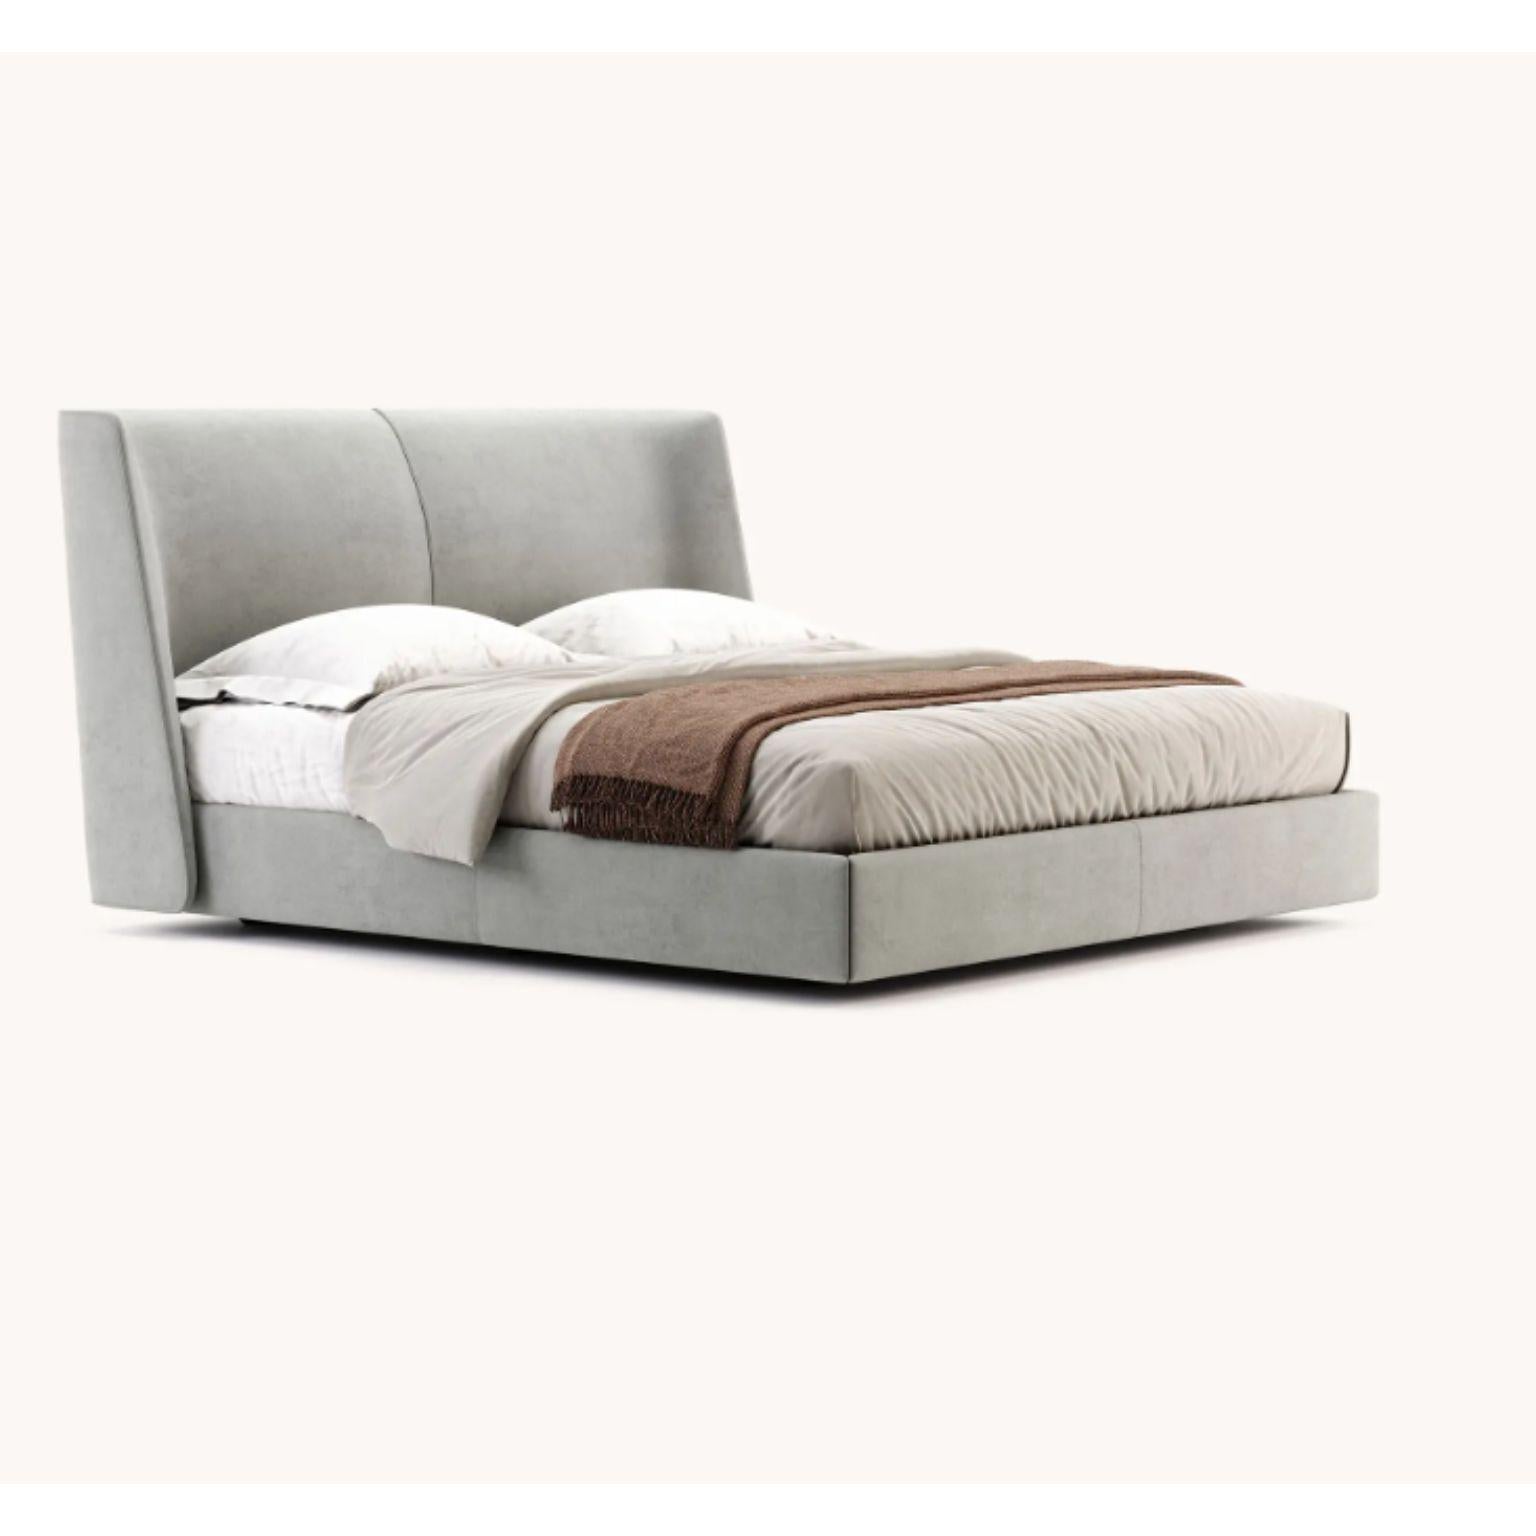 Queen size echo bed by Domkapa
Dimensions: W 178 x D 233.5 x H 115 cm.
Materials: velvet (Aldan 2921).
Also available in different materials. 

Echo is the ideal bed design if you are looking for comfort allied with stunning features and